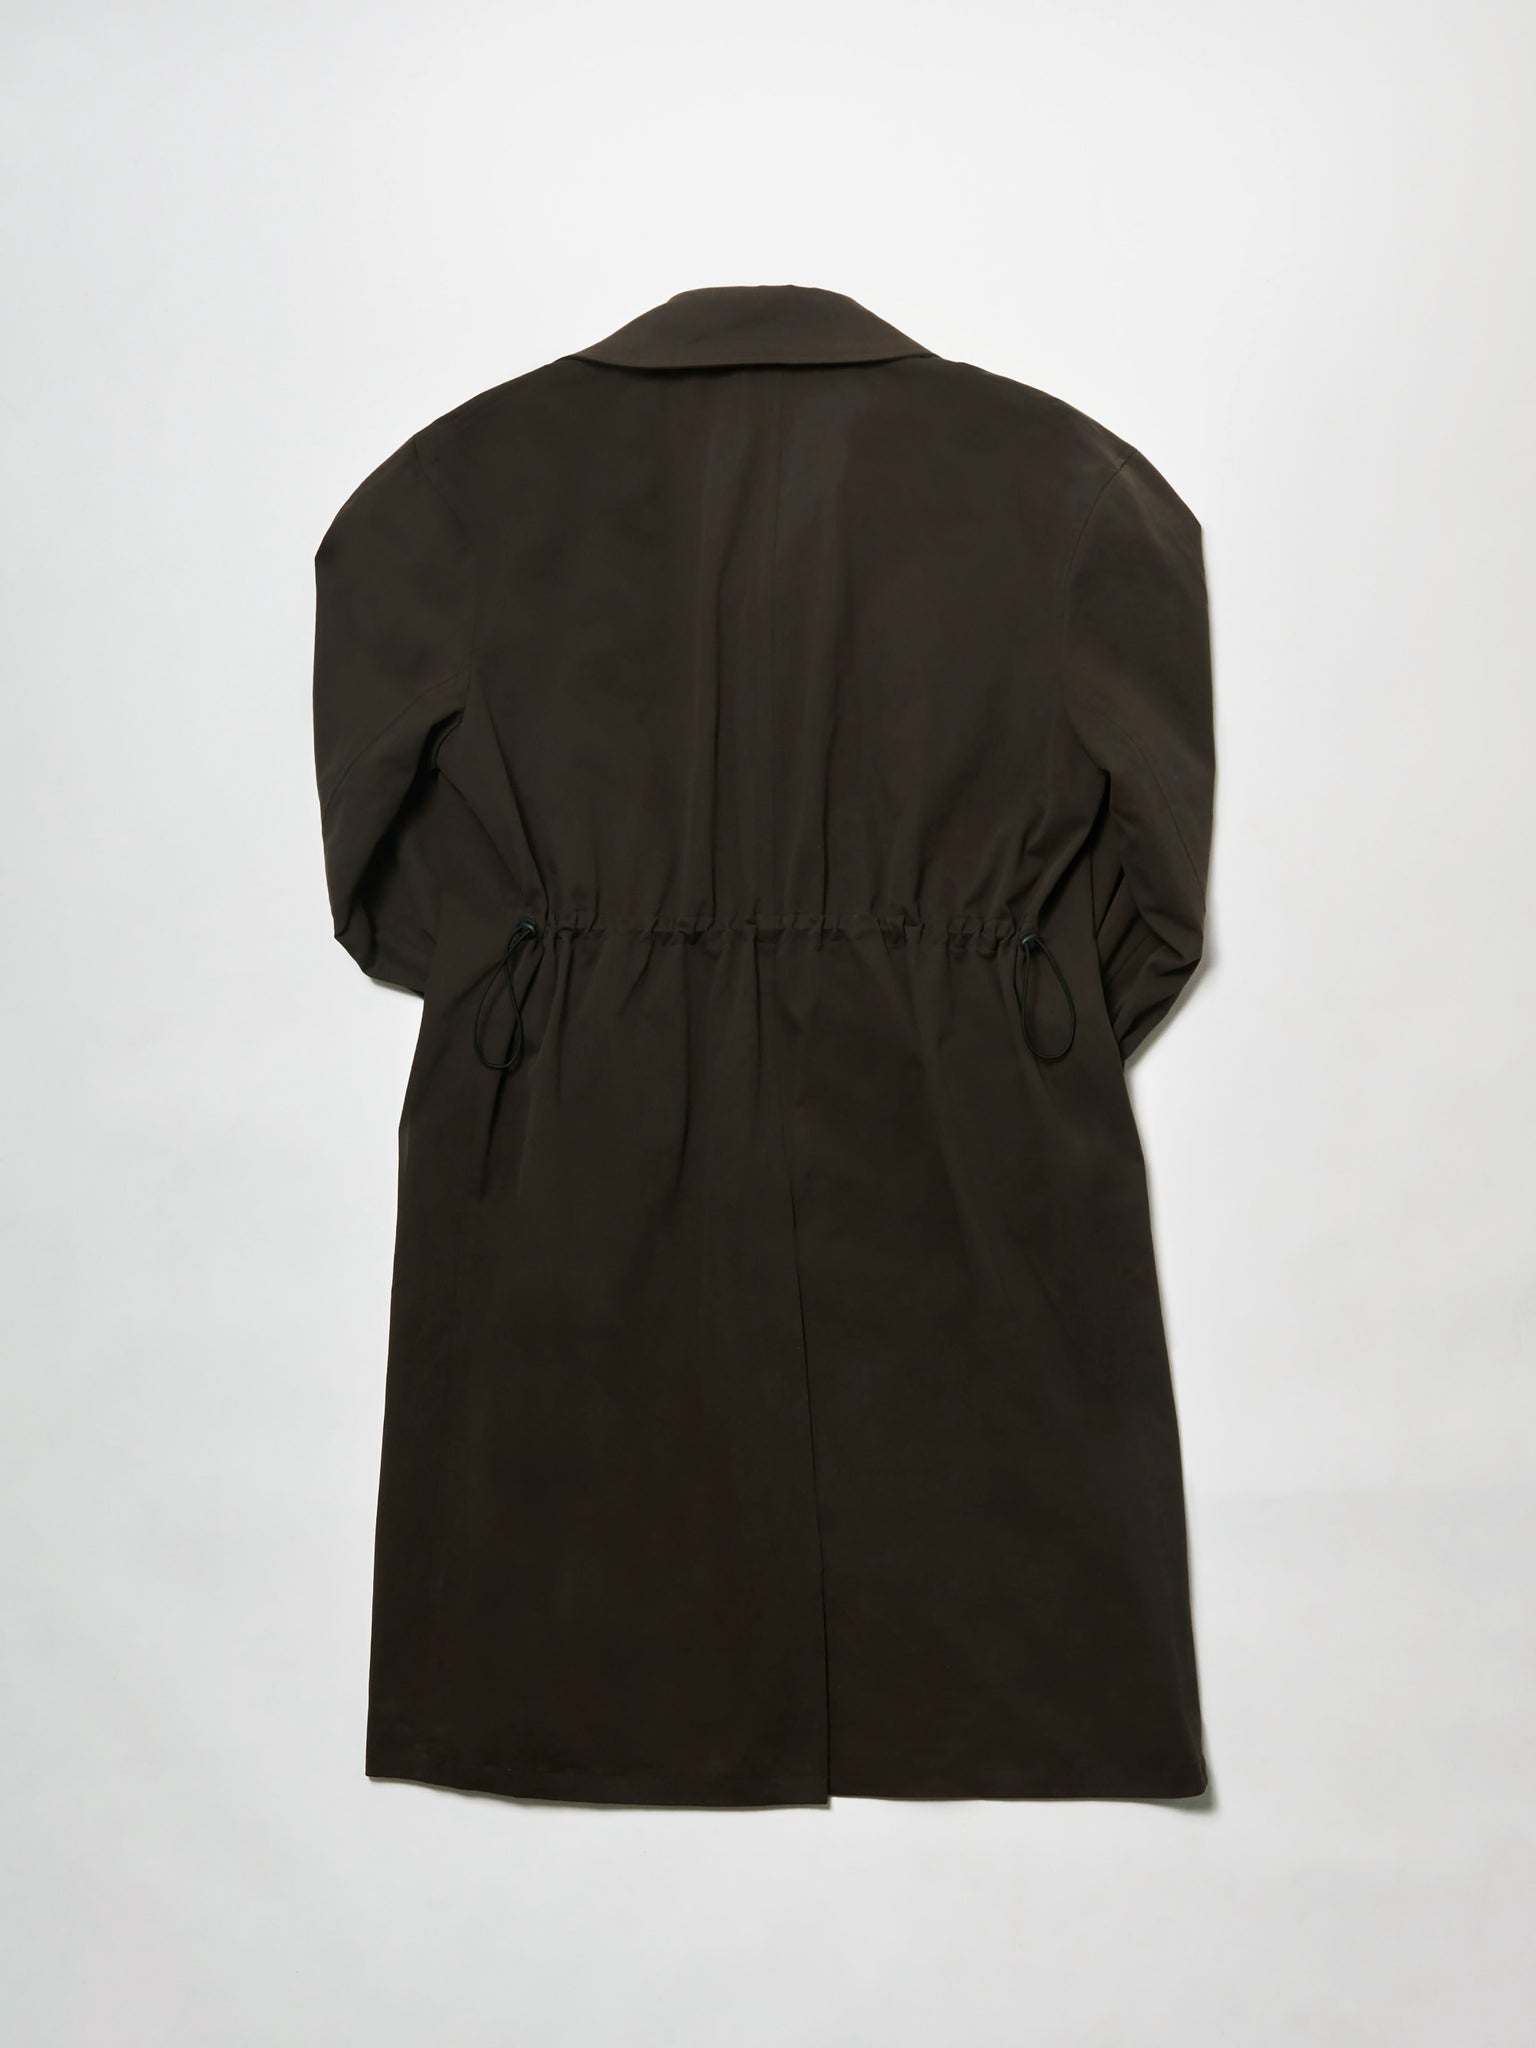 bungee trench coat - brown